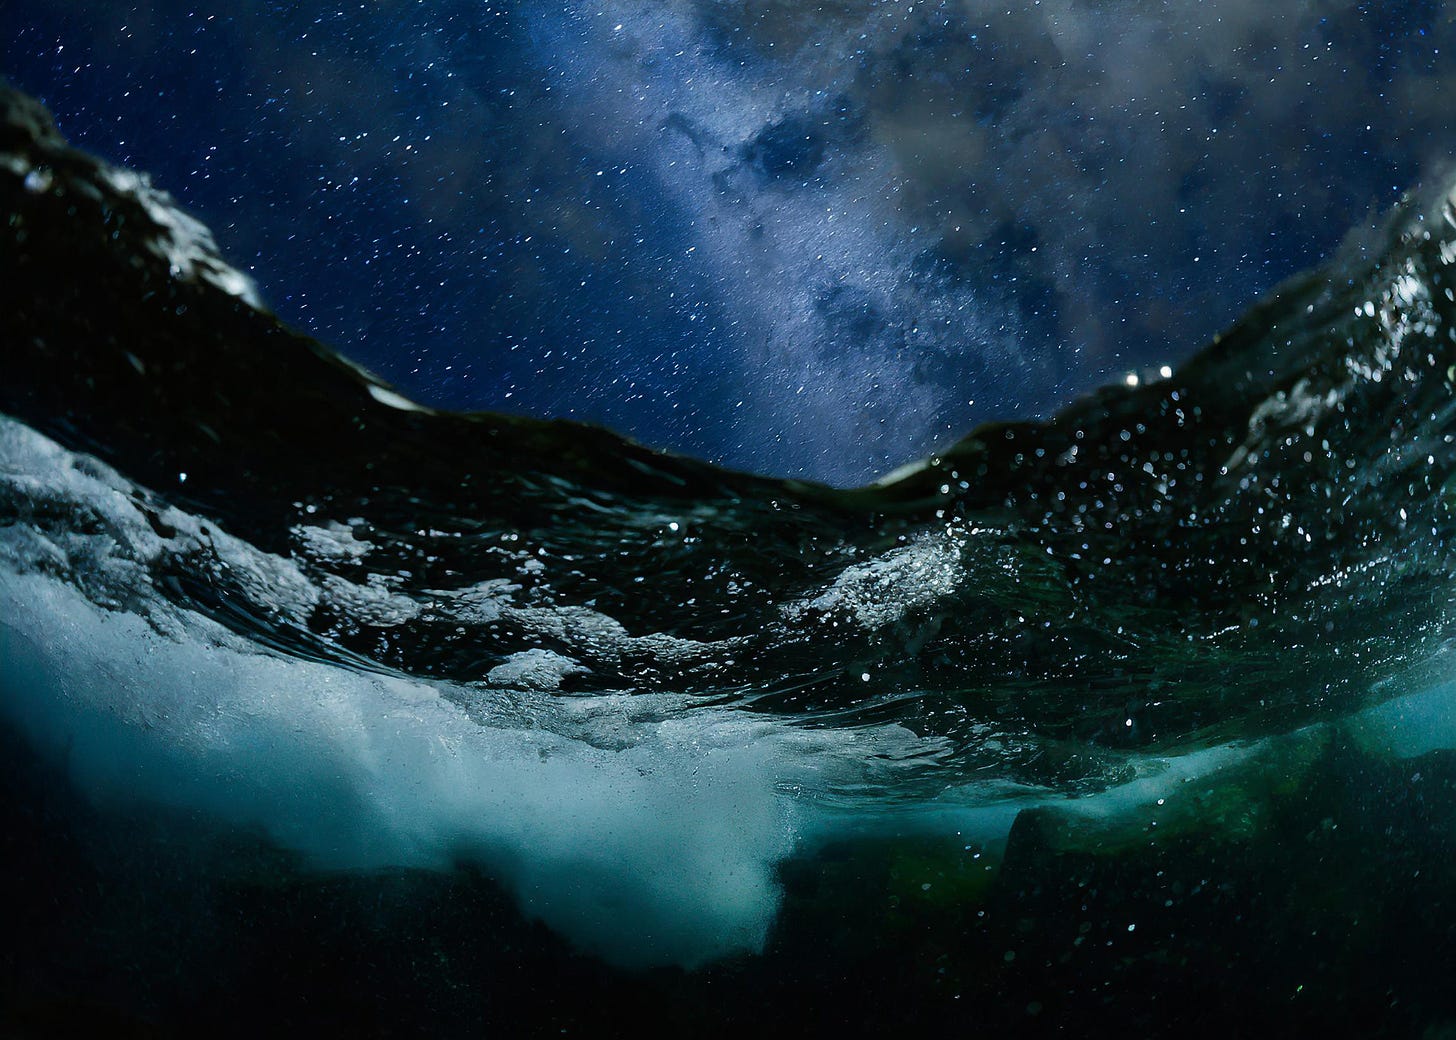 night view from beneath stormy ocean looking up at surreal starry sky